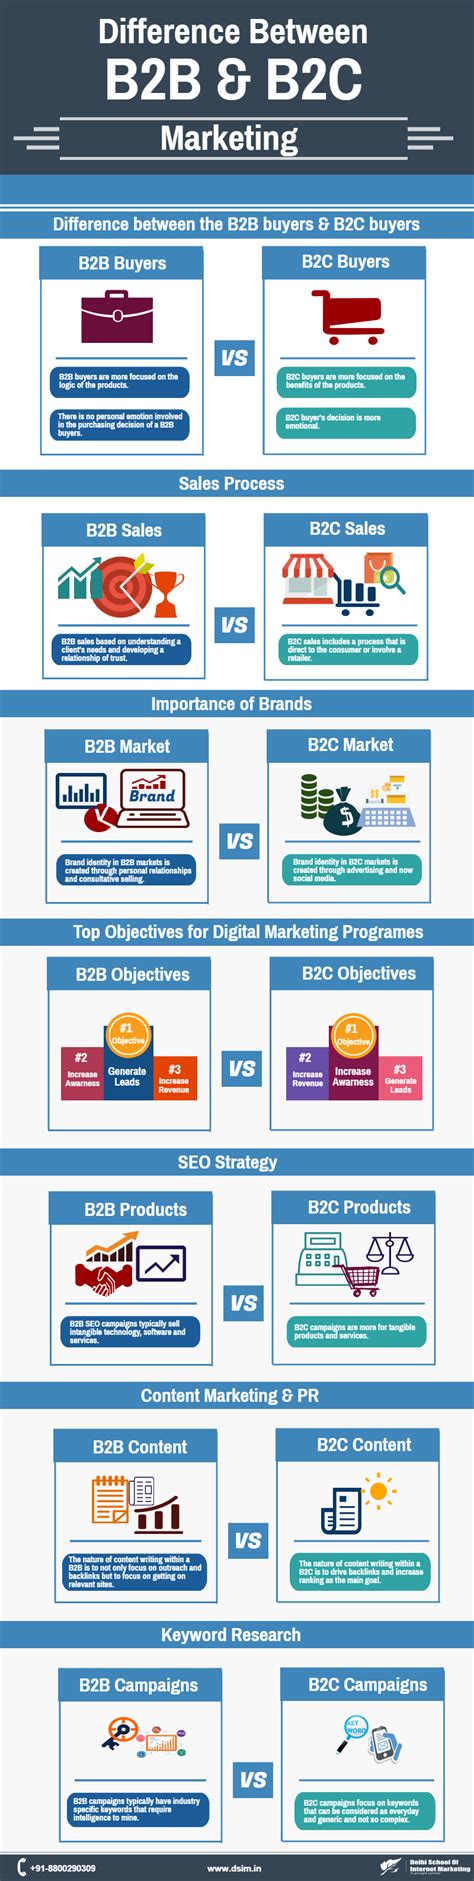 [Infographic]- Difference Between B2B & B2C Marketing